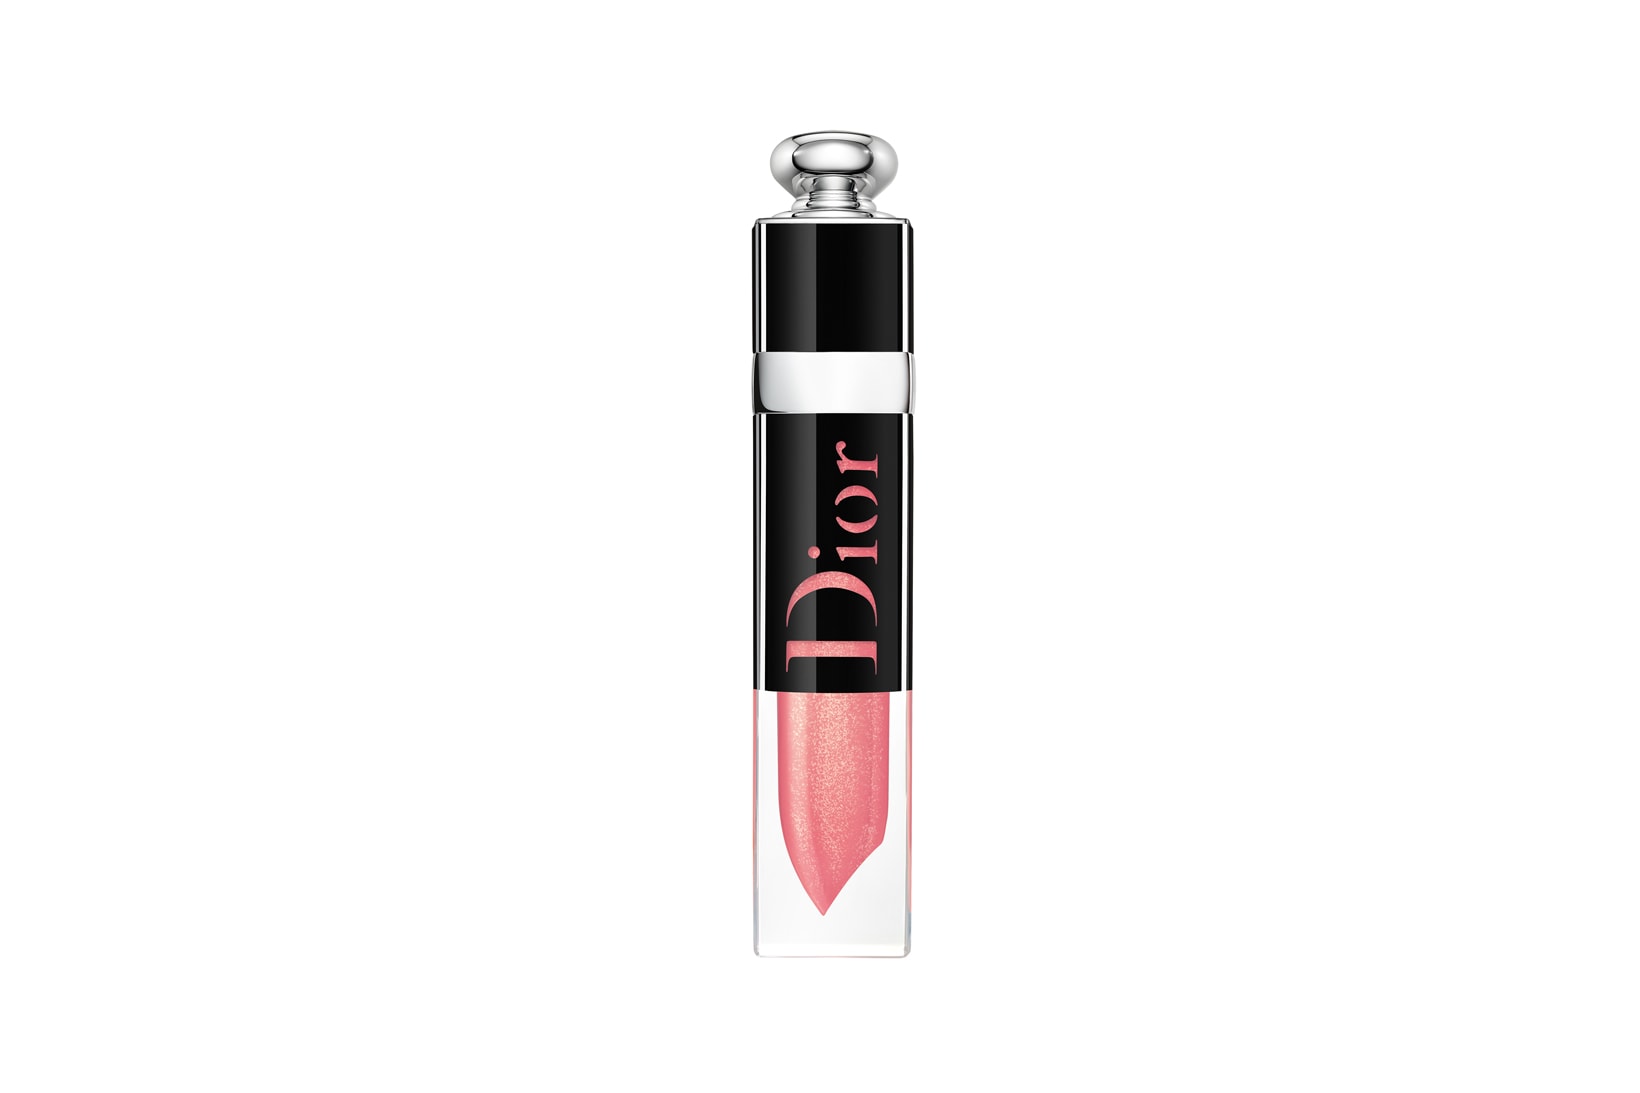 Dior Beauty Wild Earth Summer 2019 Collection Addict Lacquer Plump Pink